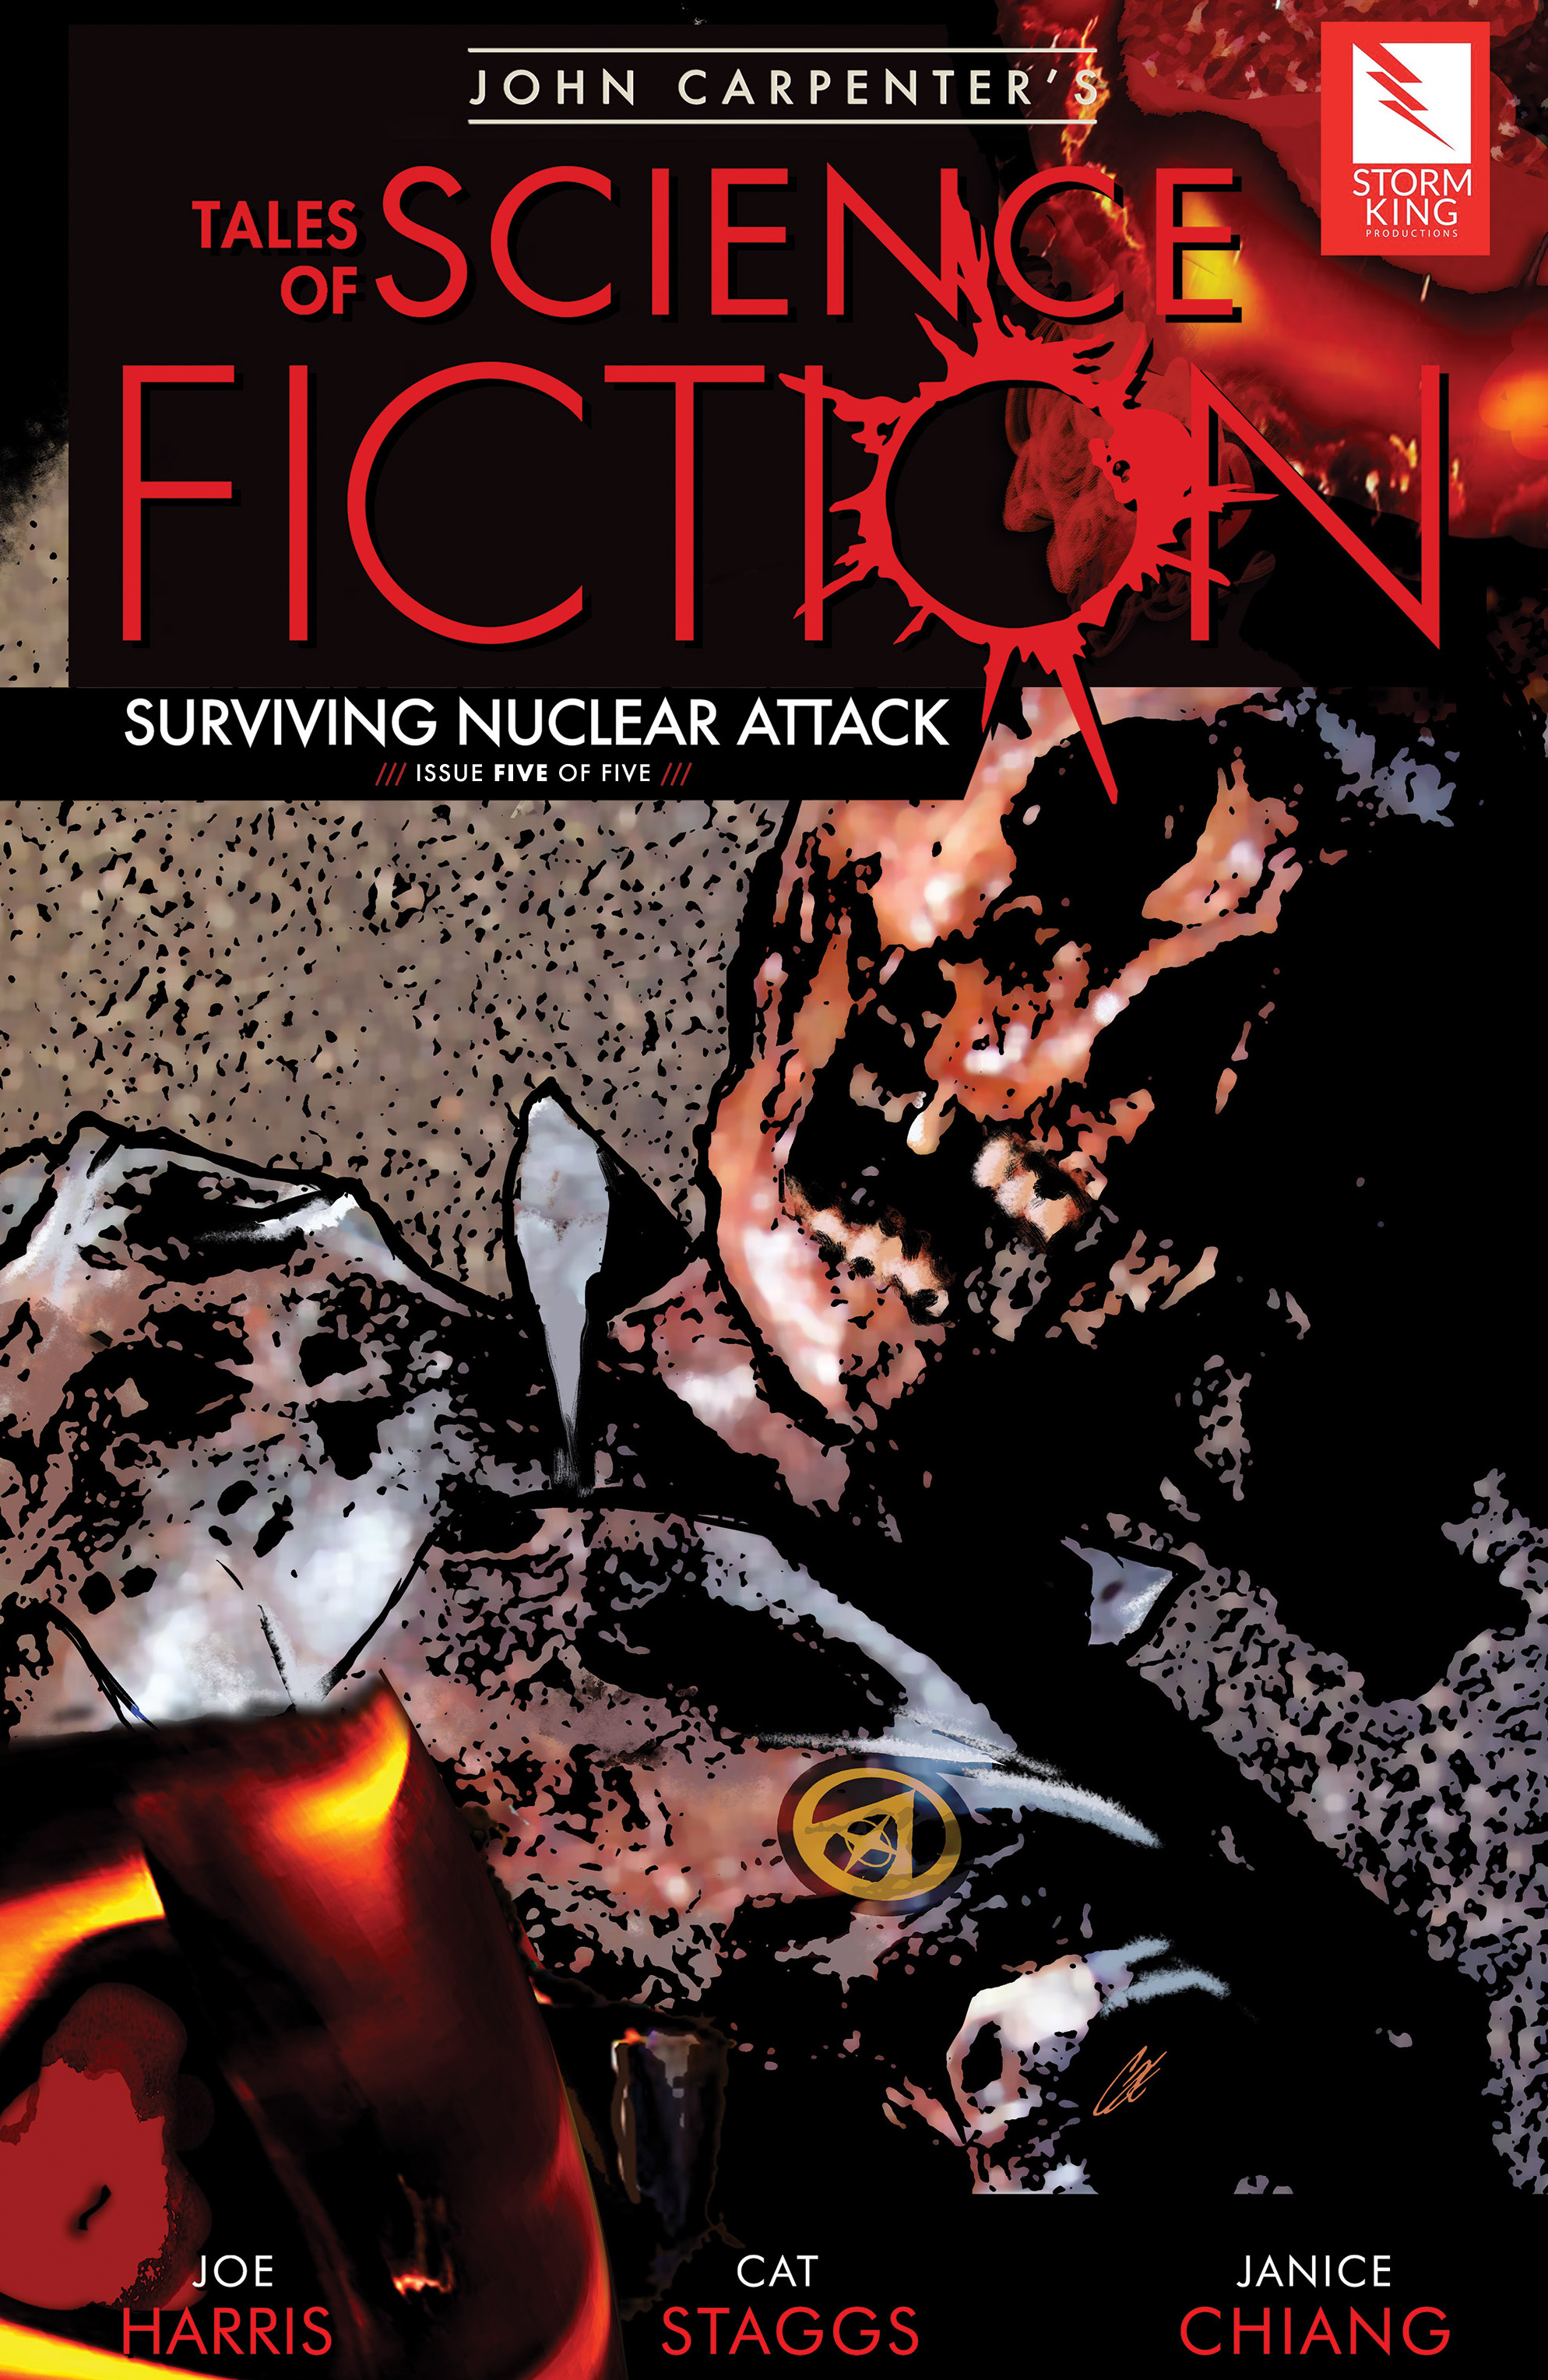 Read online John Carpenter's Tales of Science Fiction: Surviving Nuclear Attack comic -  Issue #5 - 1